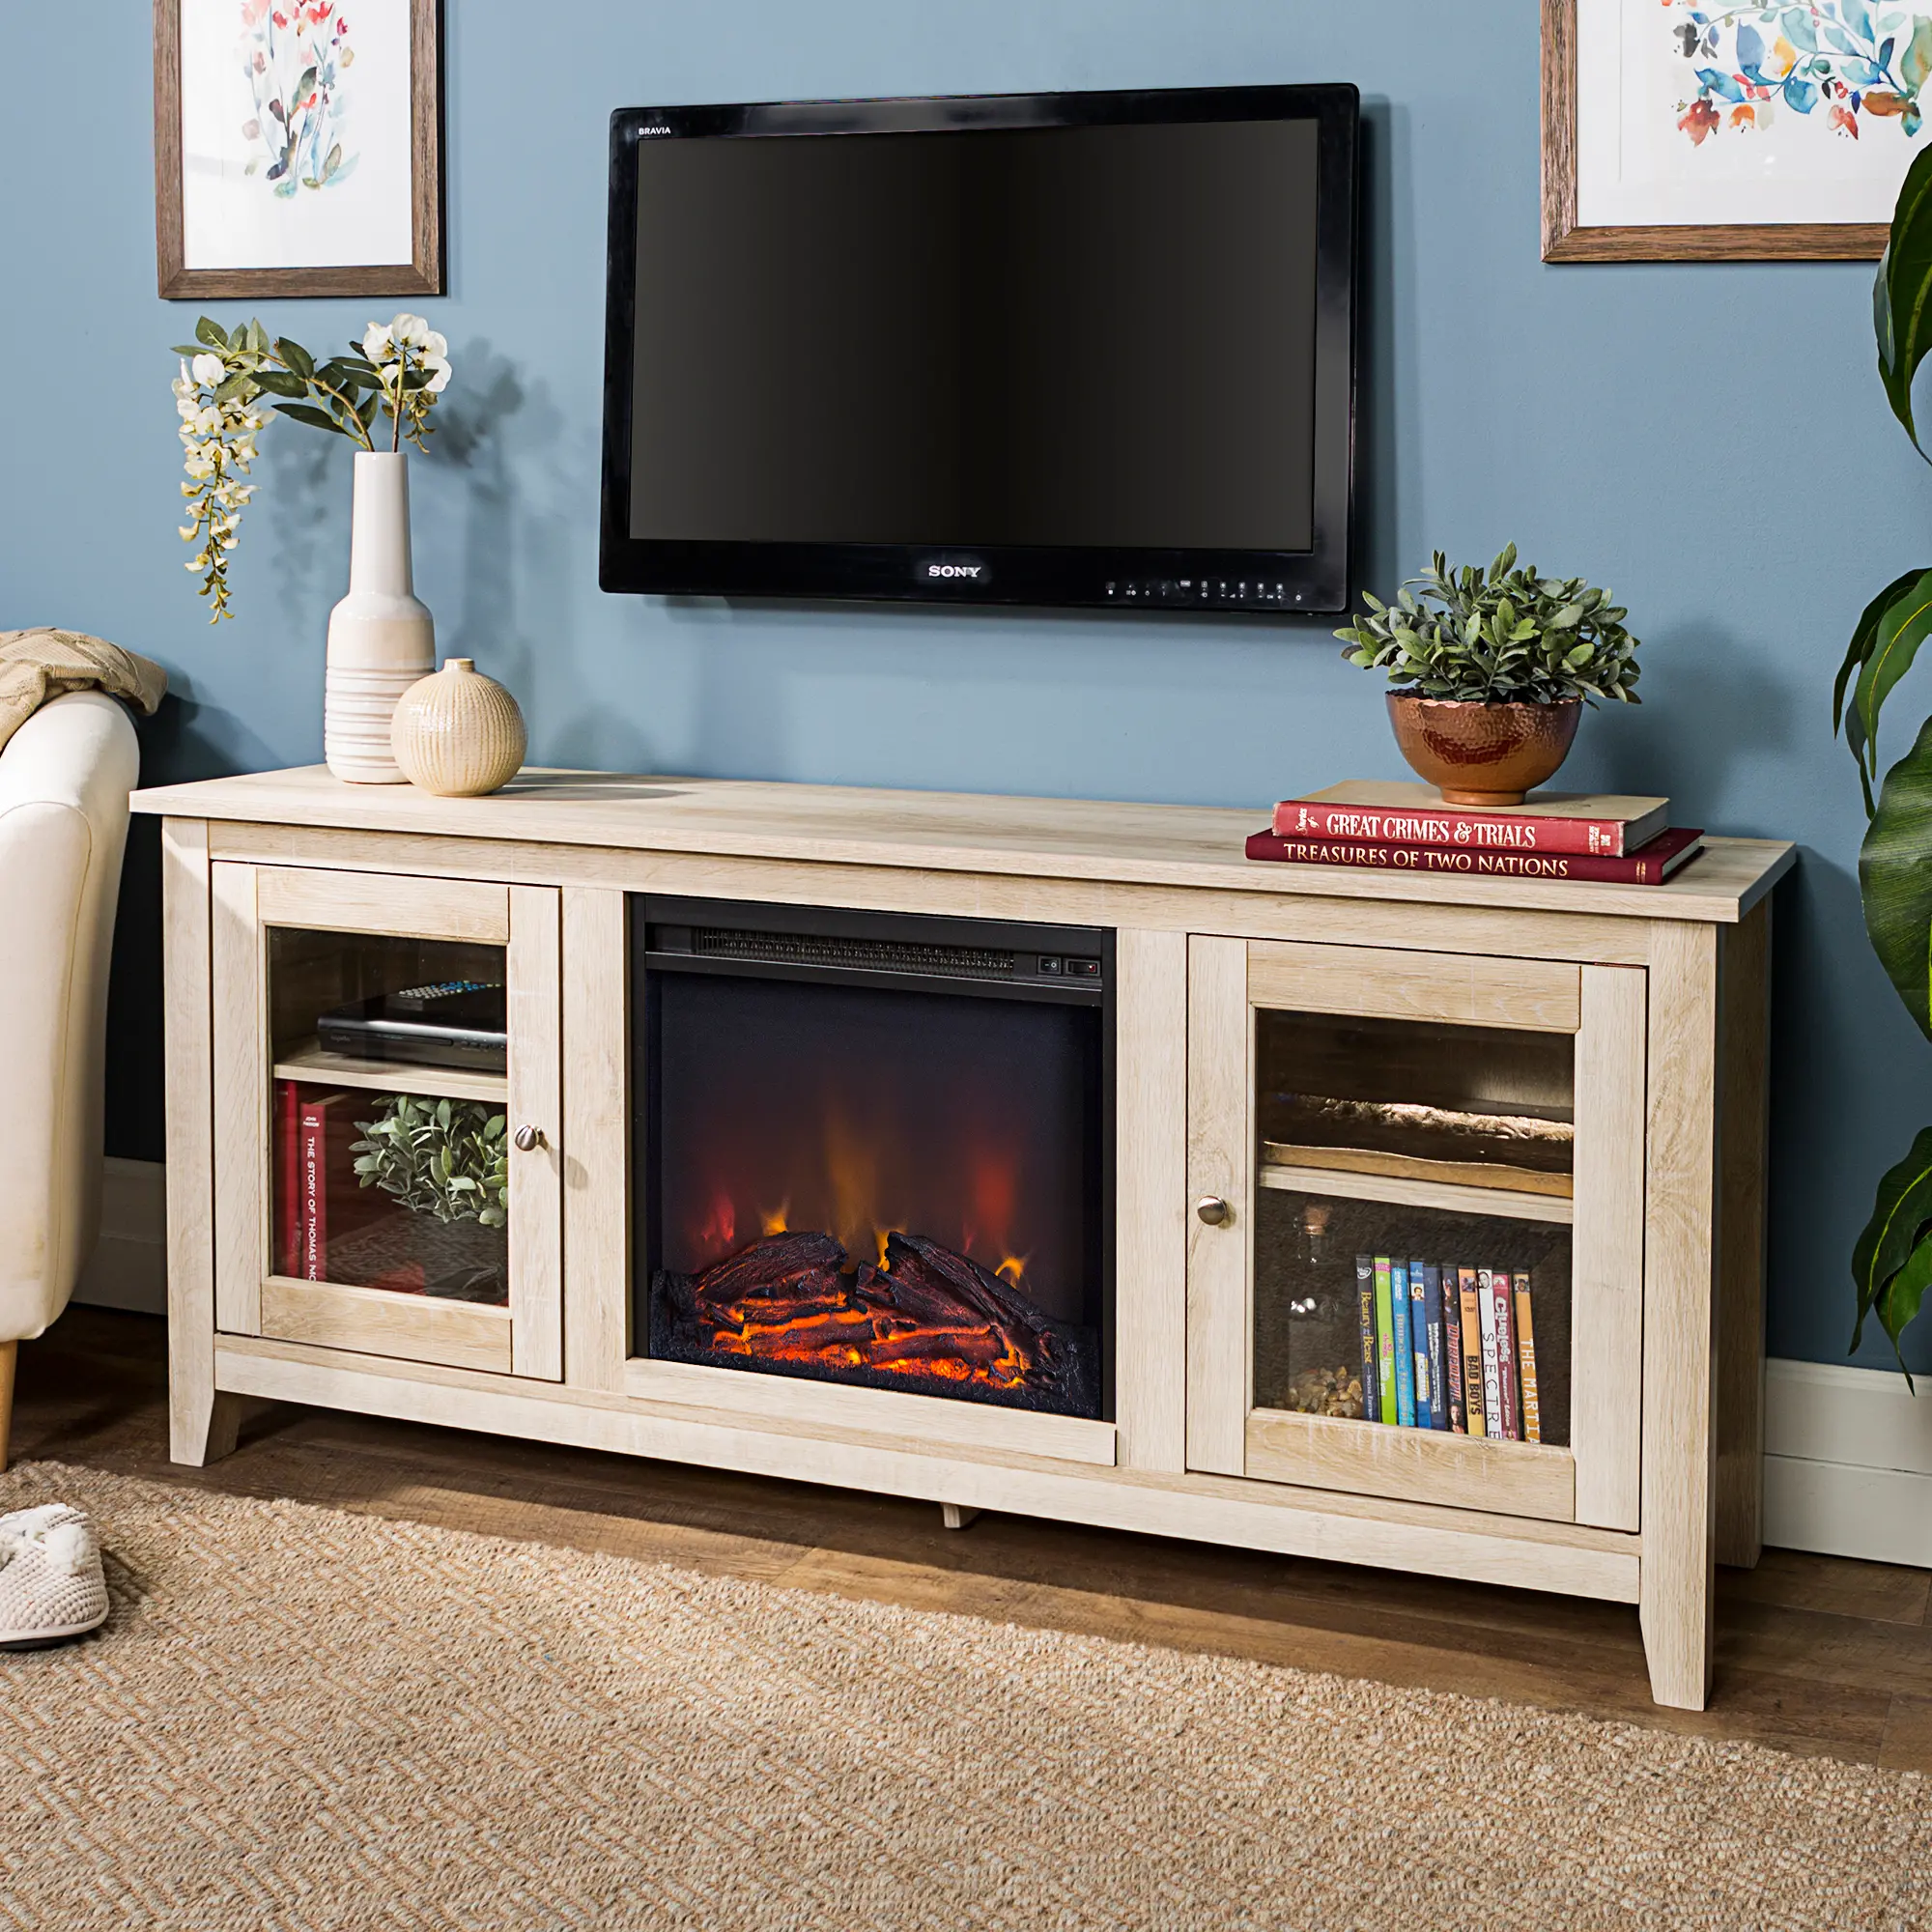 Photos - Mount/Stand Walker Edison White Oak Traditional 58 Inch Fireplace TV Stand - Walker Ed 